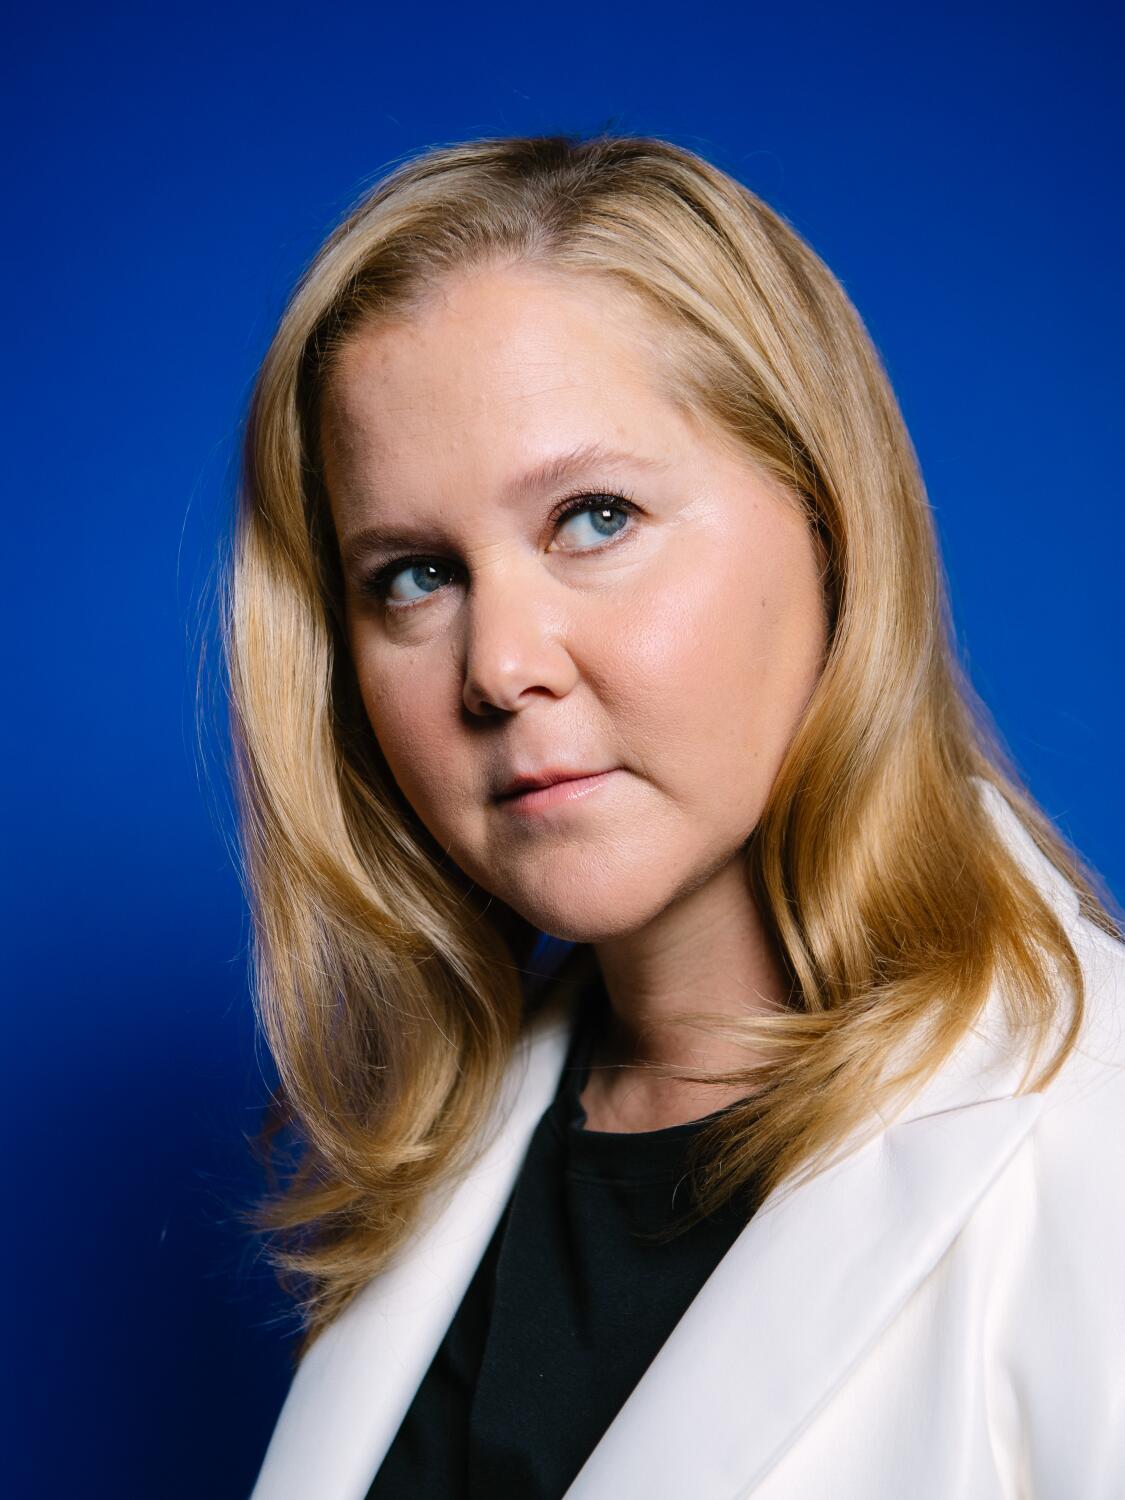 Amy Schumer shares Cushing syndrome diagnosis to 'advocate for women's health'